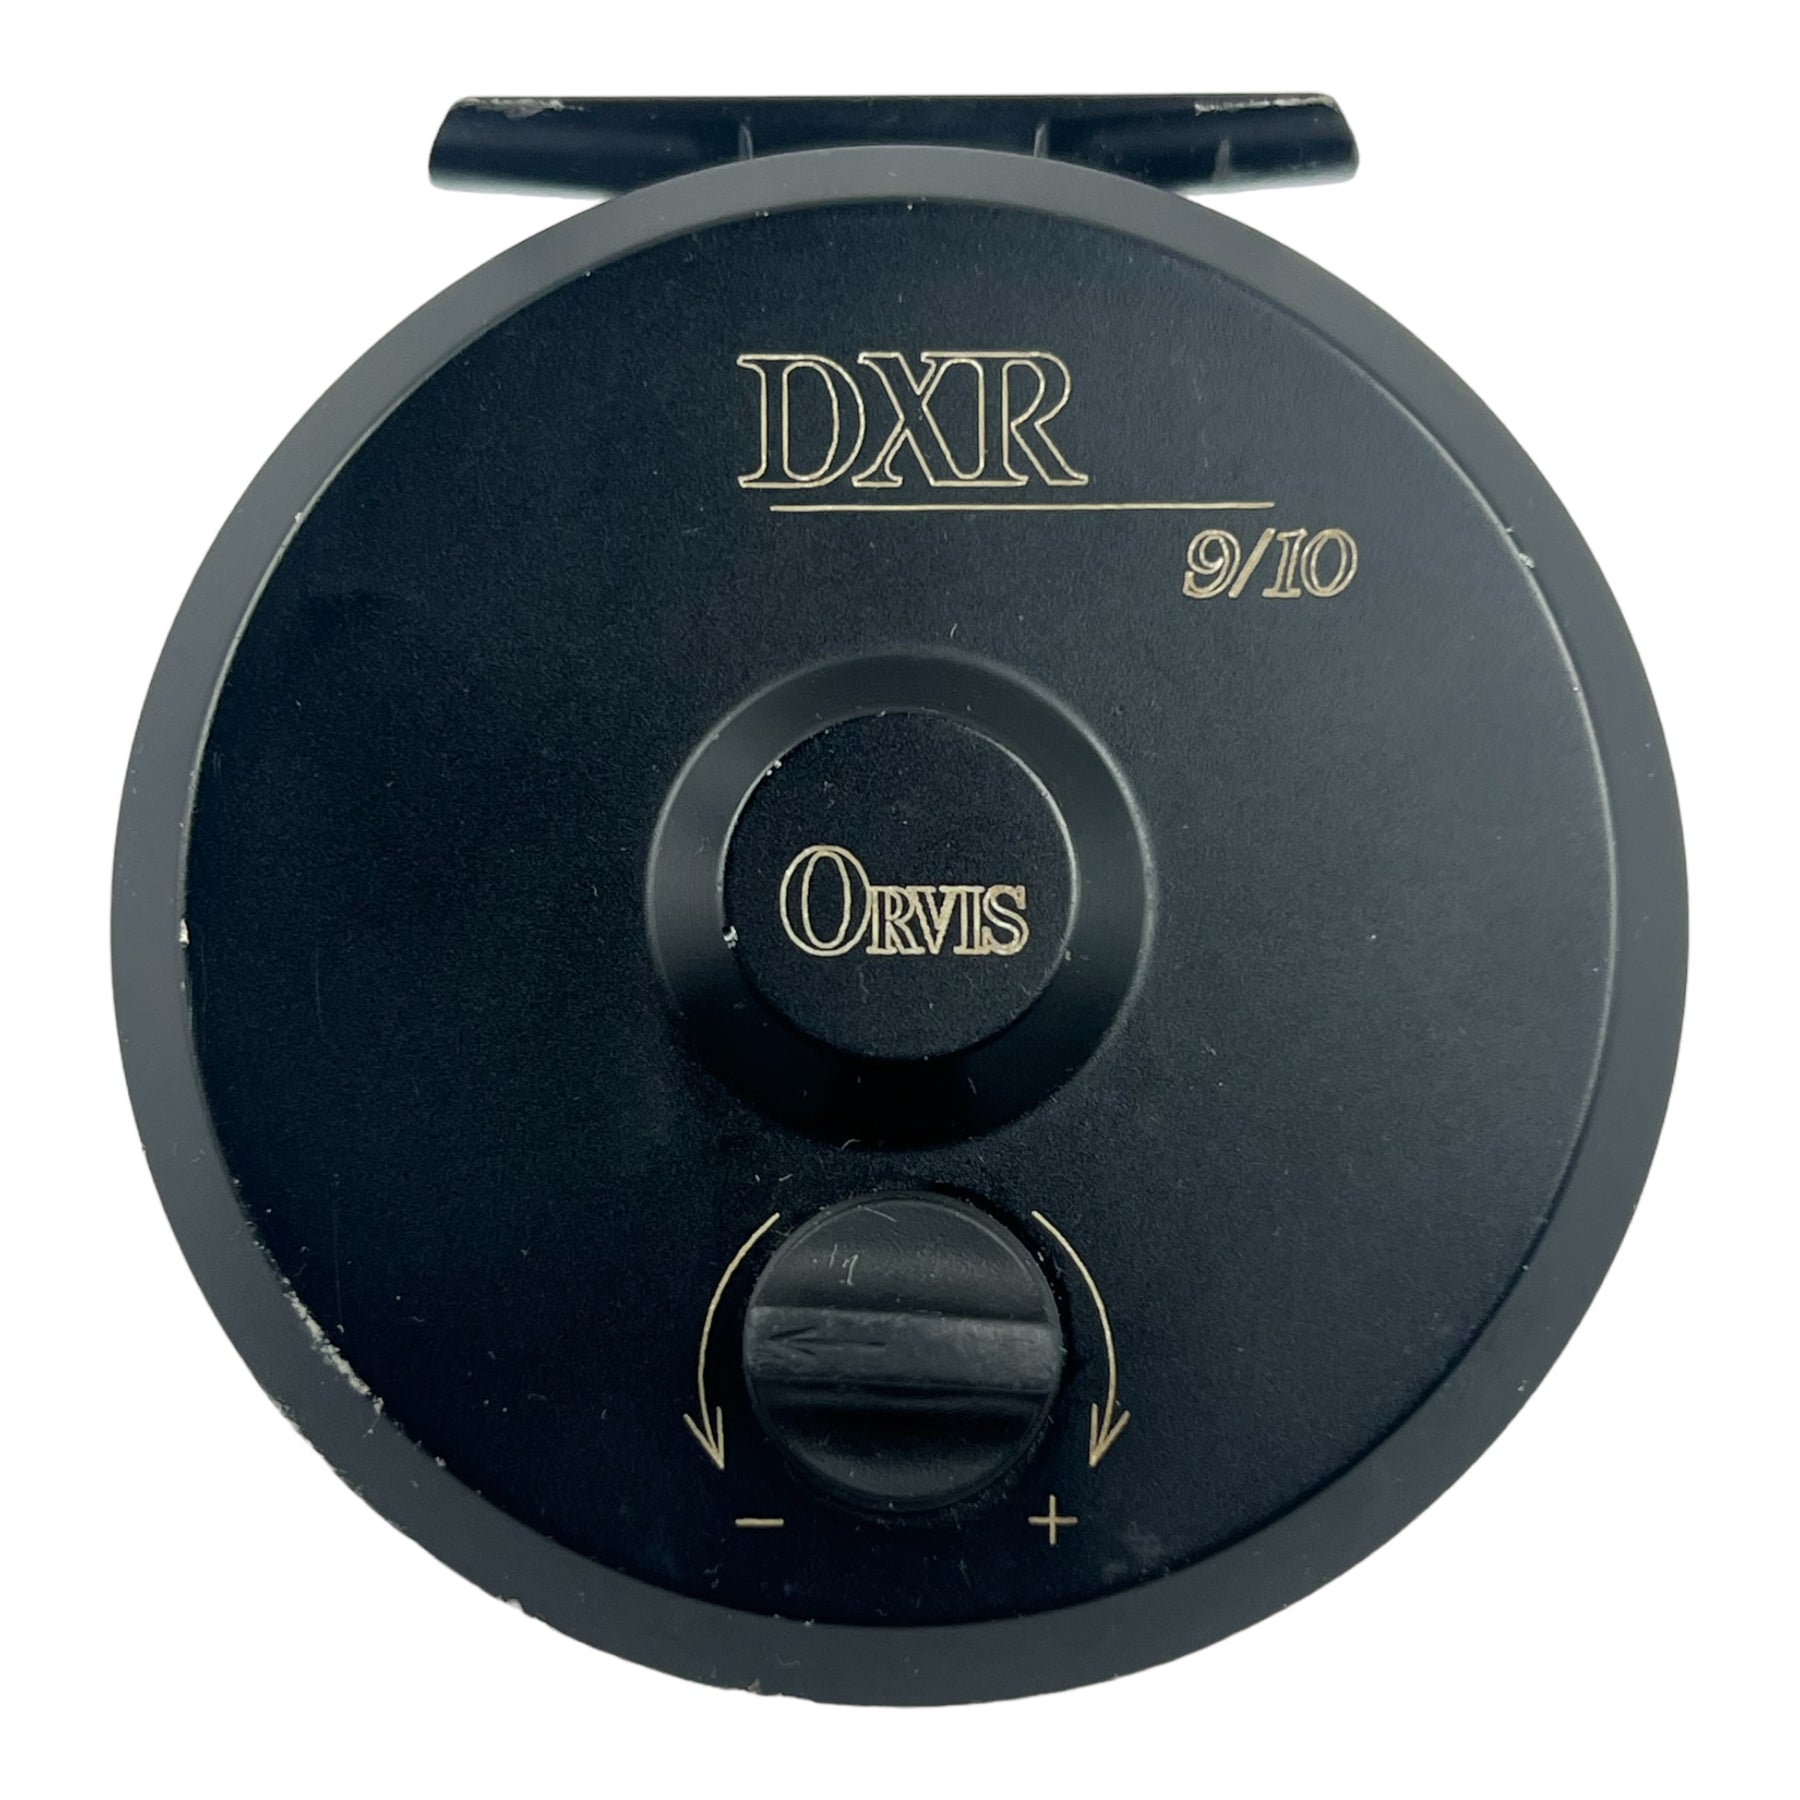 Orvis Fly Fishing Reels for Sale